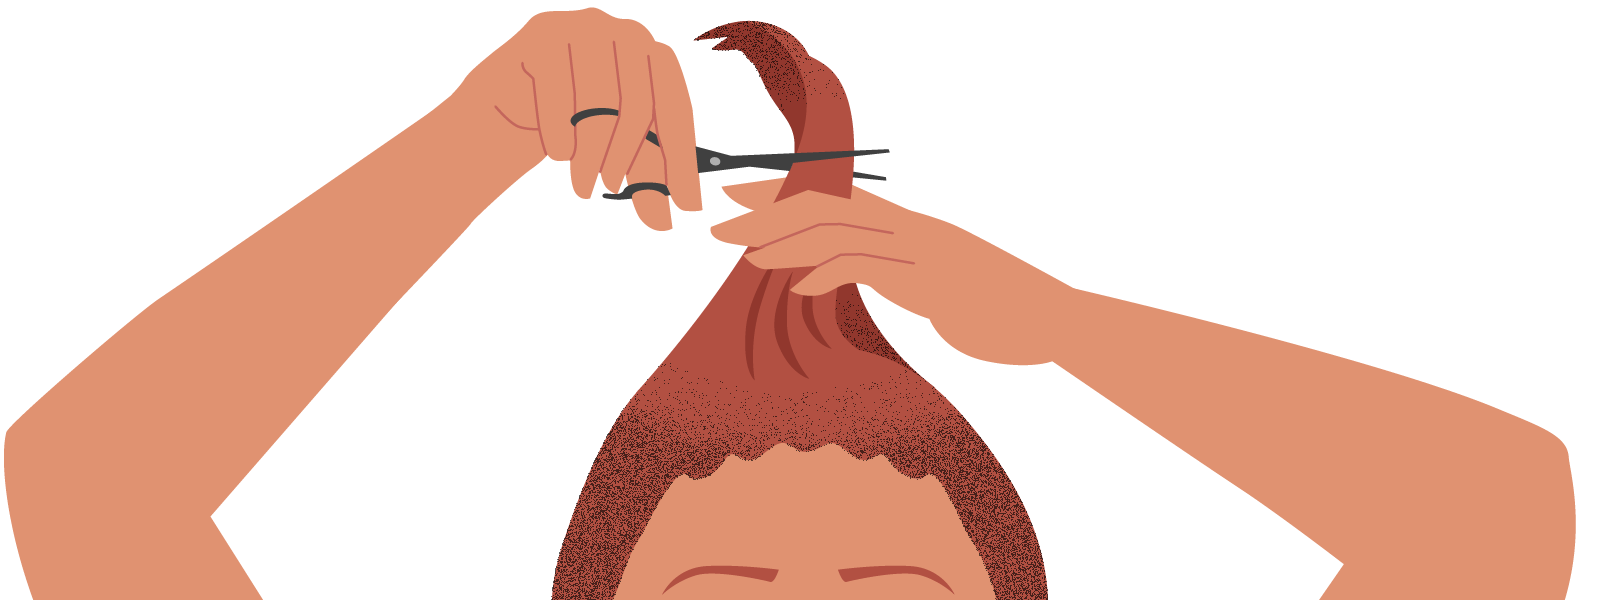 how to cut your hair with a clipper